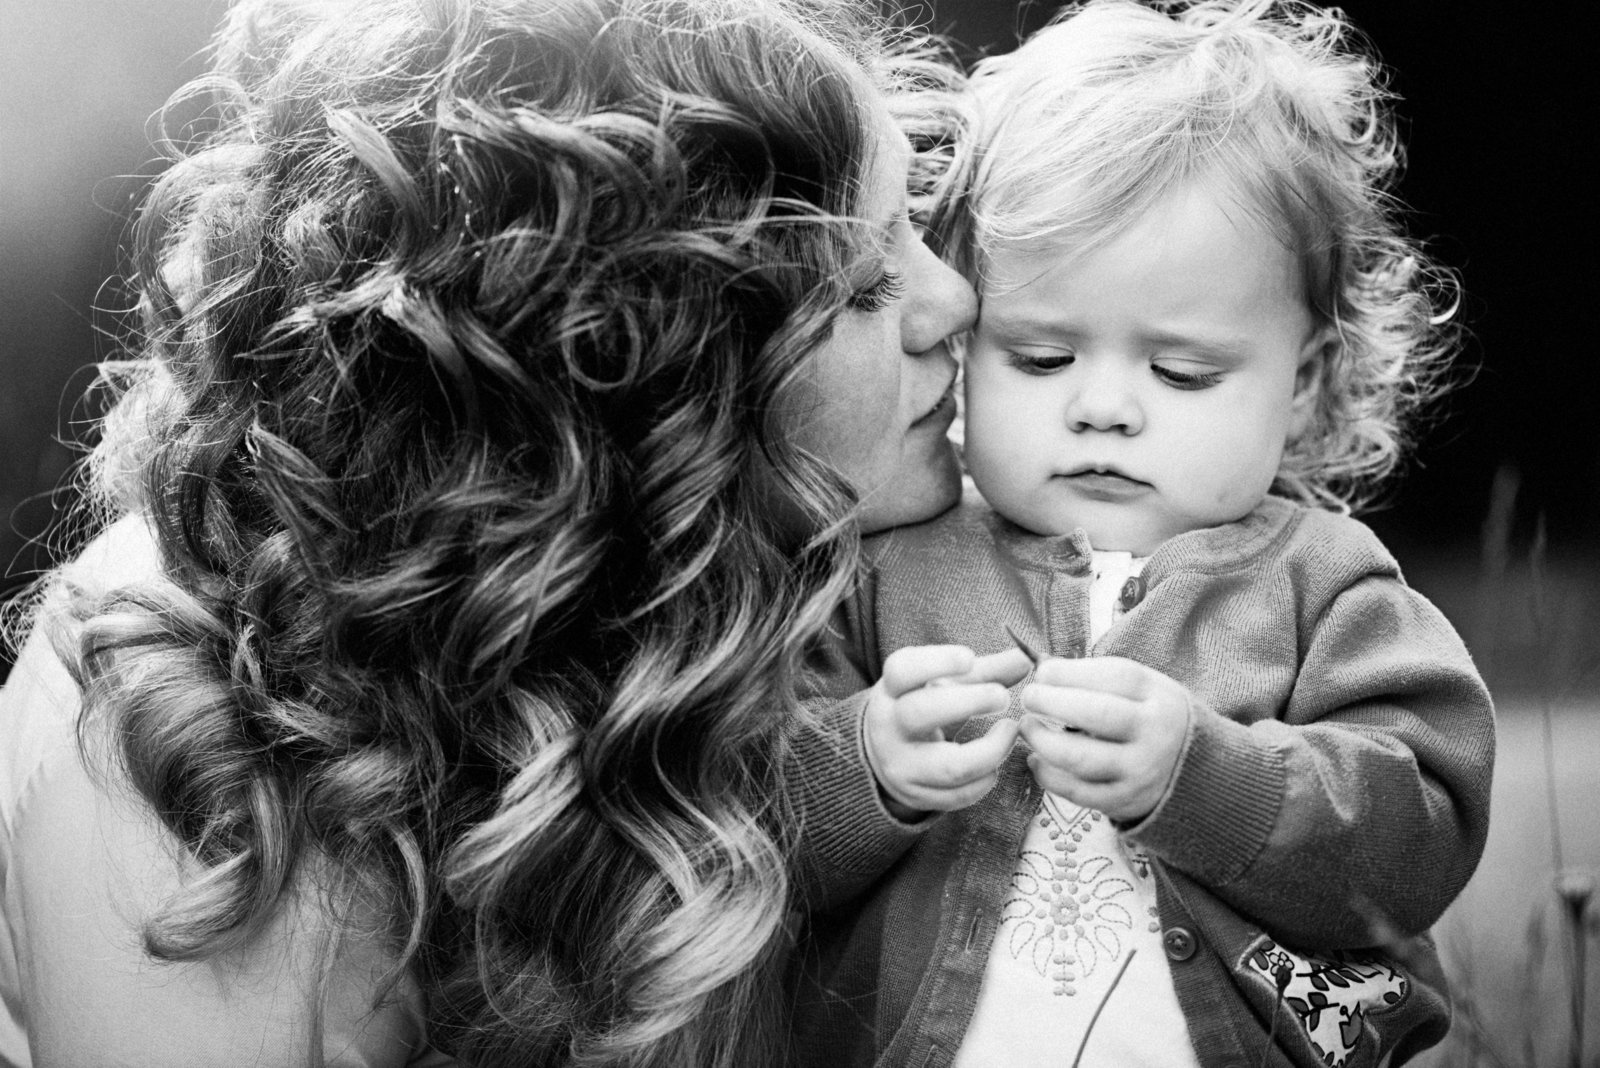 A black and white picture of a toddler being kissed on the cheek by her curly haired mother